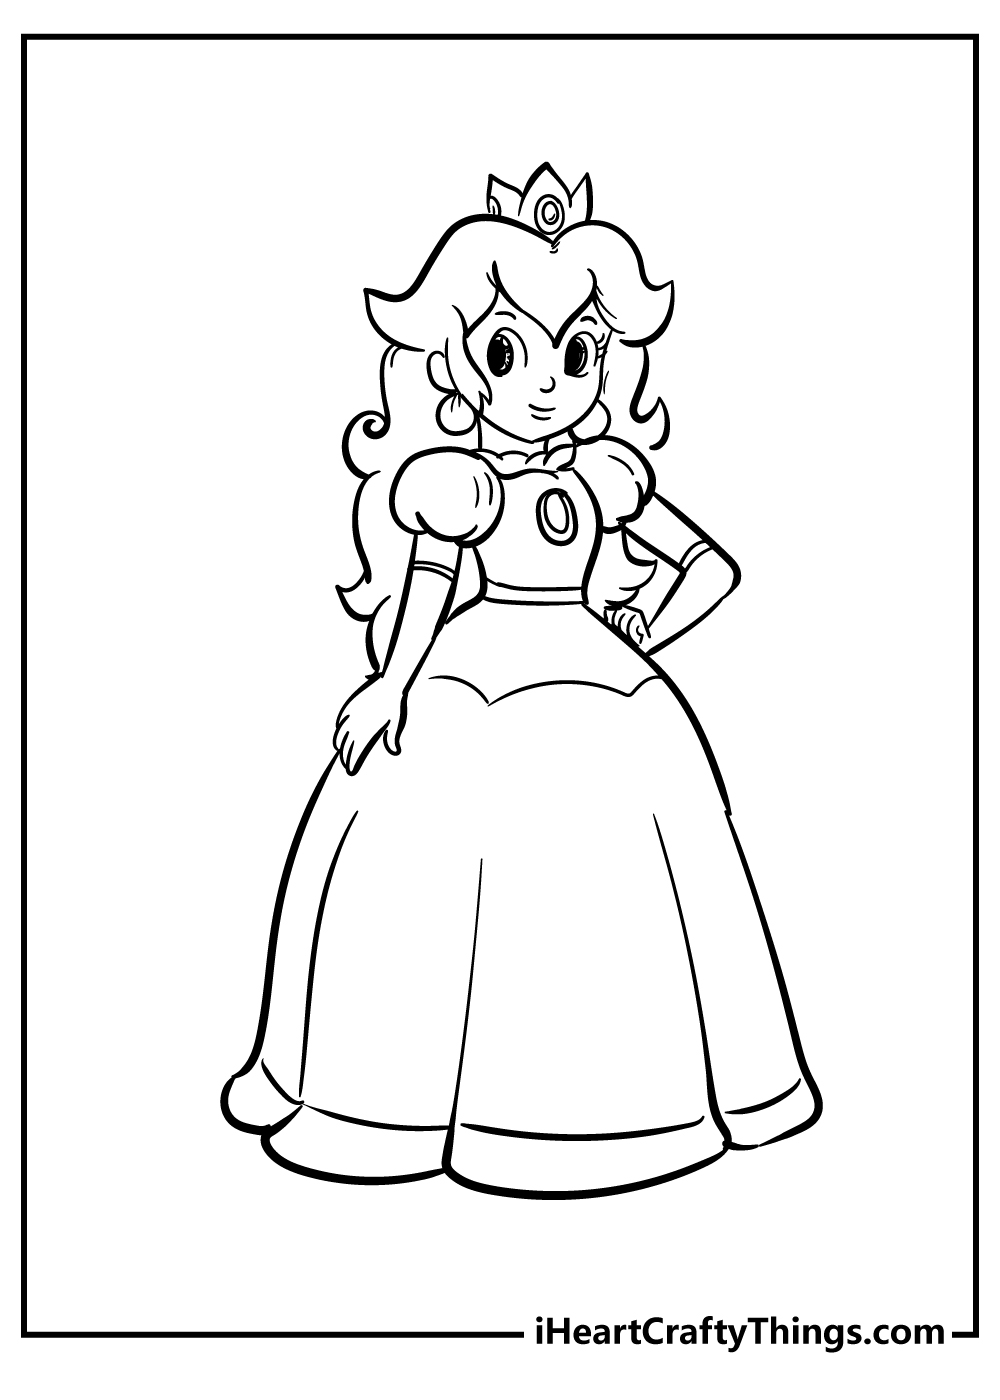 Princess Peach coloring pages free printable